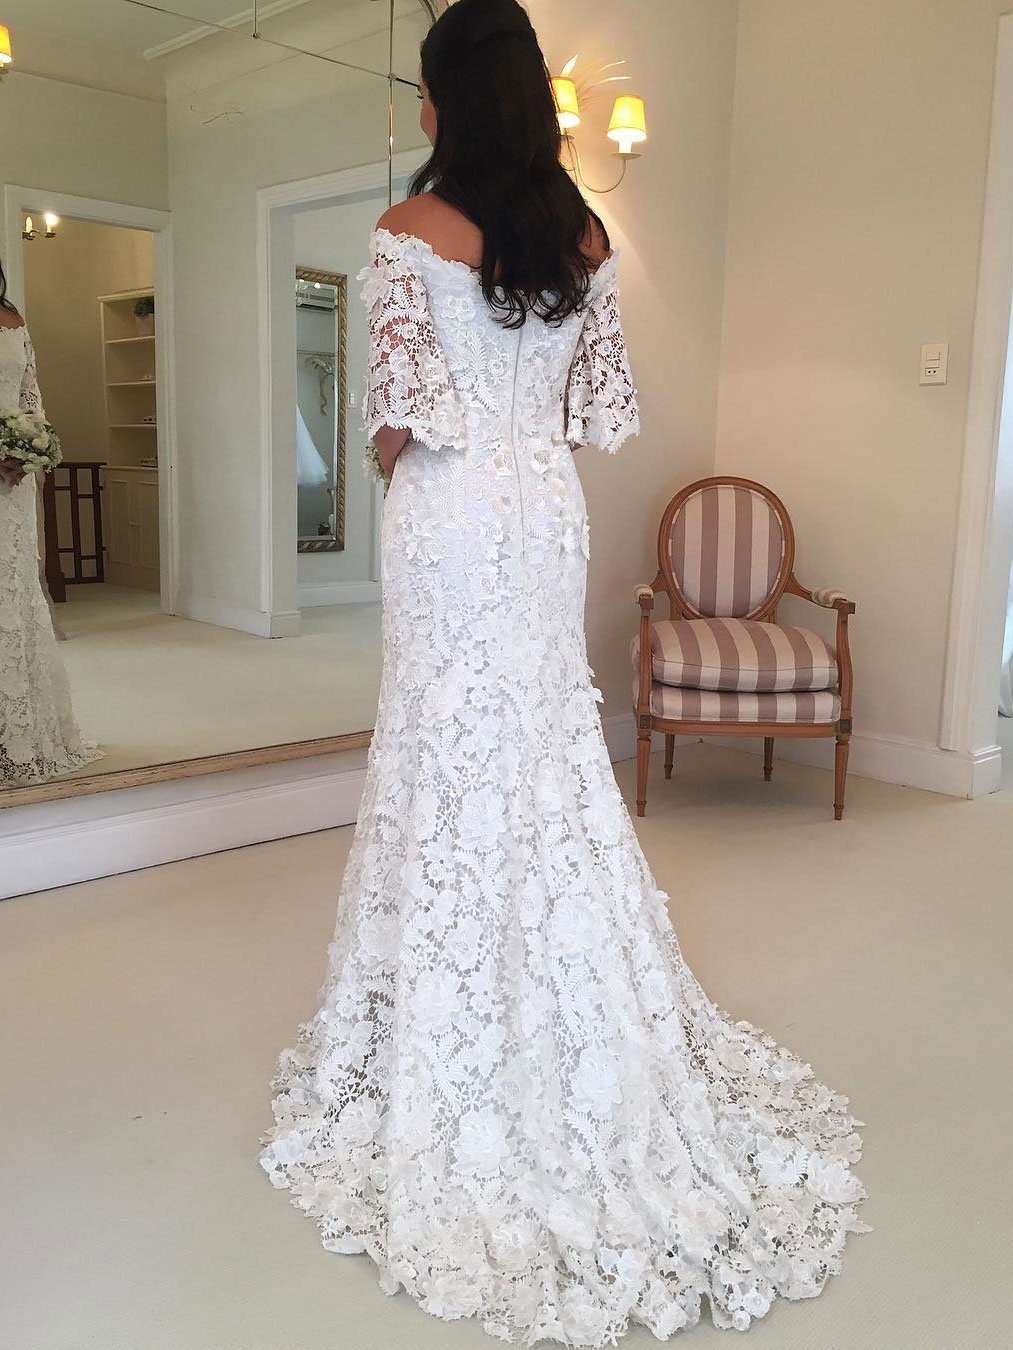 Classy Half Sleeve Off the Shoulder Lace Wedding Dress W297 - Ombreprom